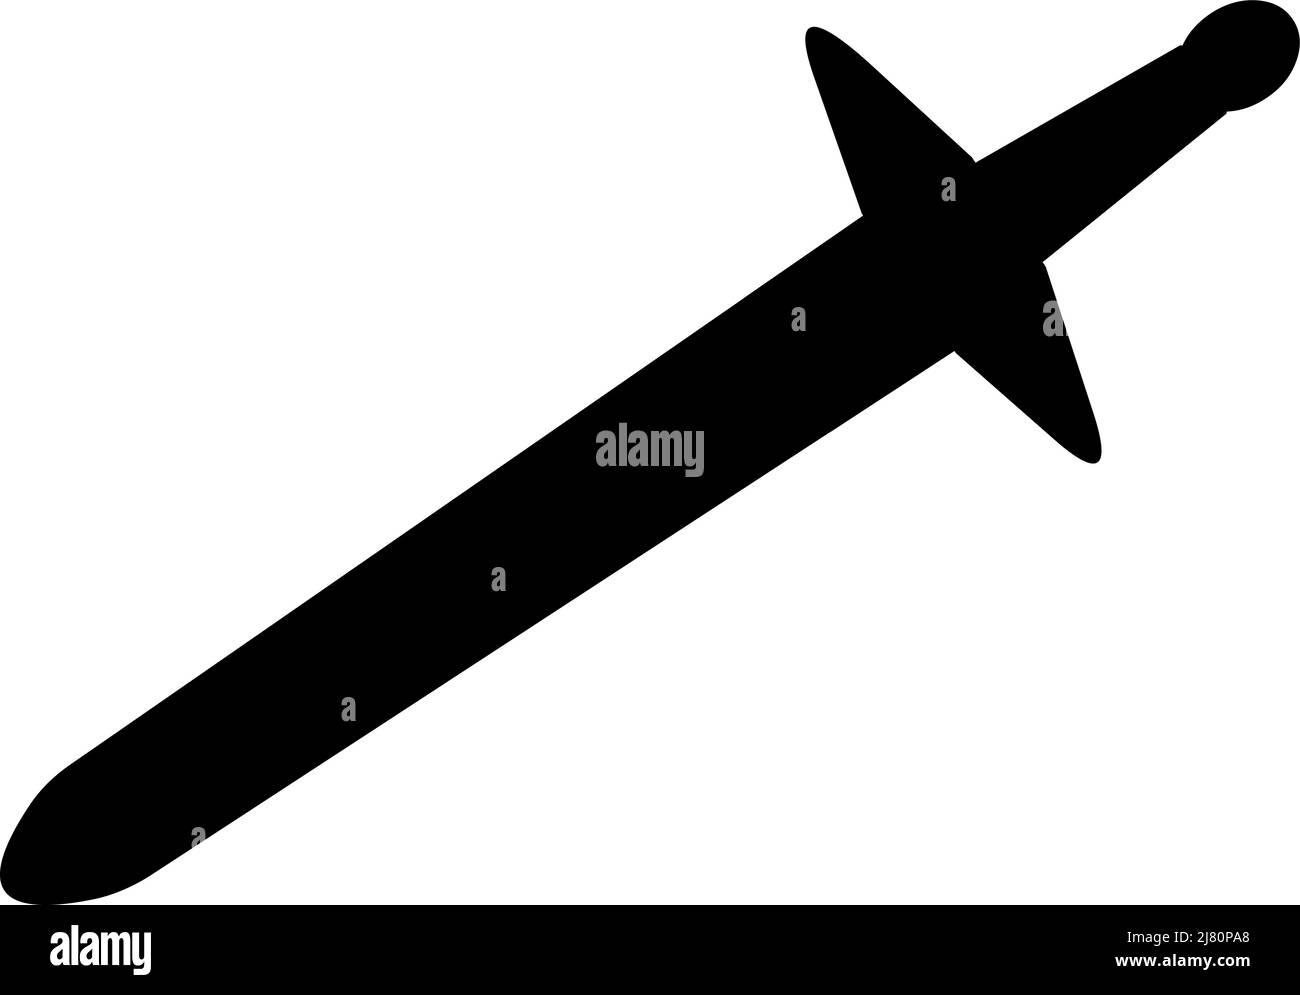 Vector illustration of black silhouette of a sword Stock Vector